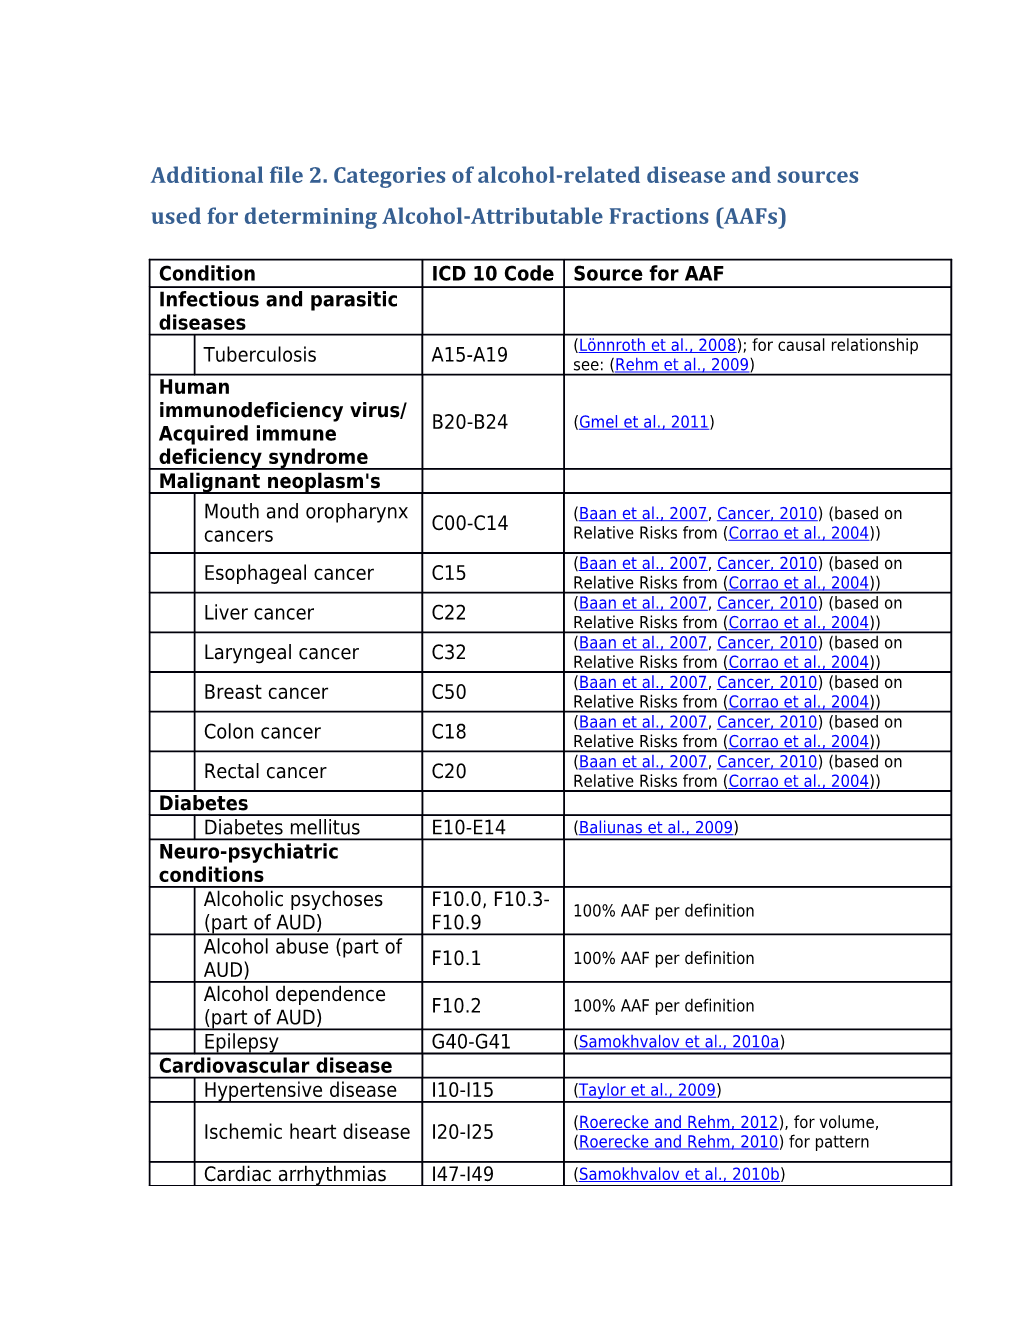 Additional File 2. Categories of Alcohol-Related Disease and Sources Used for Determining